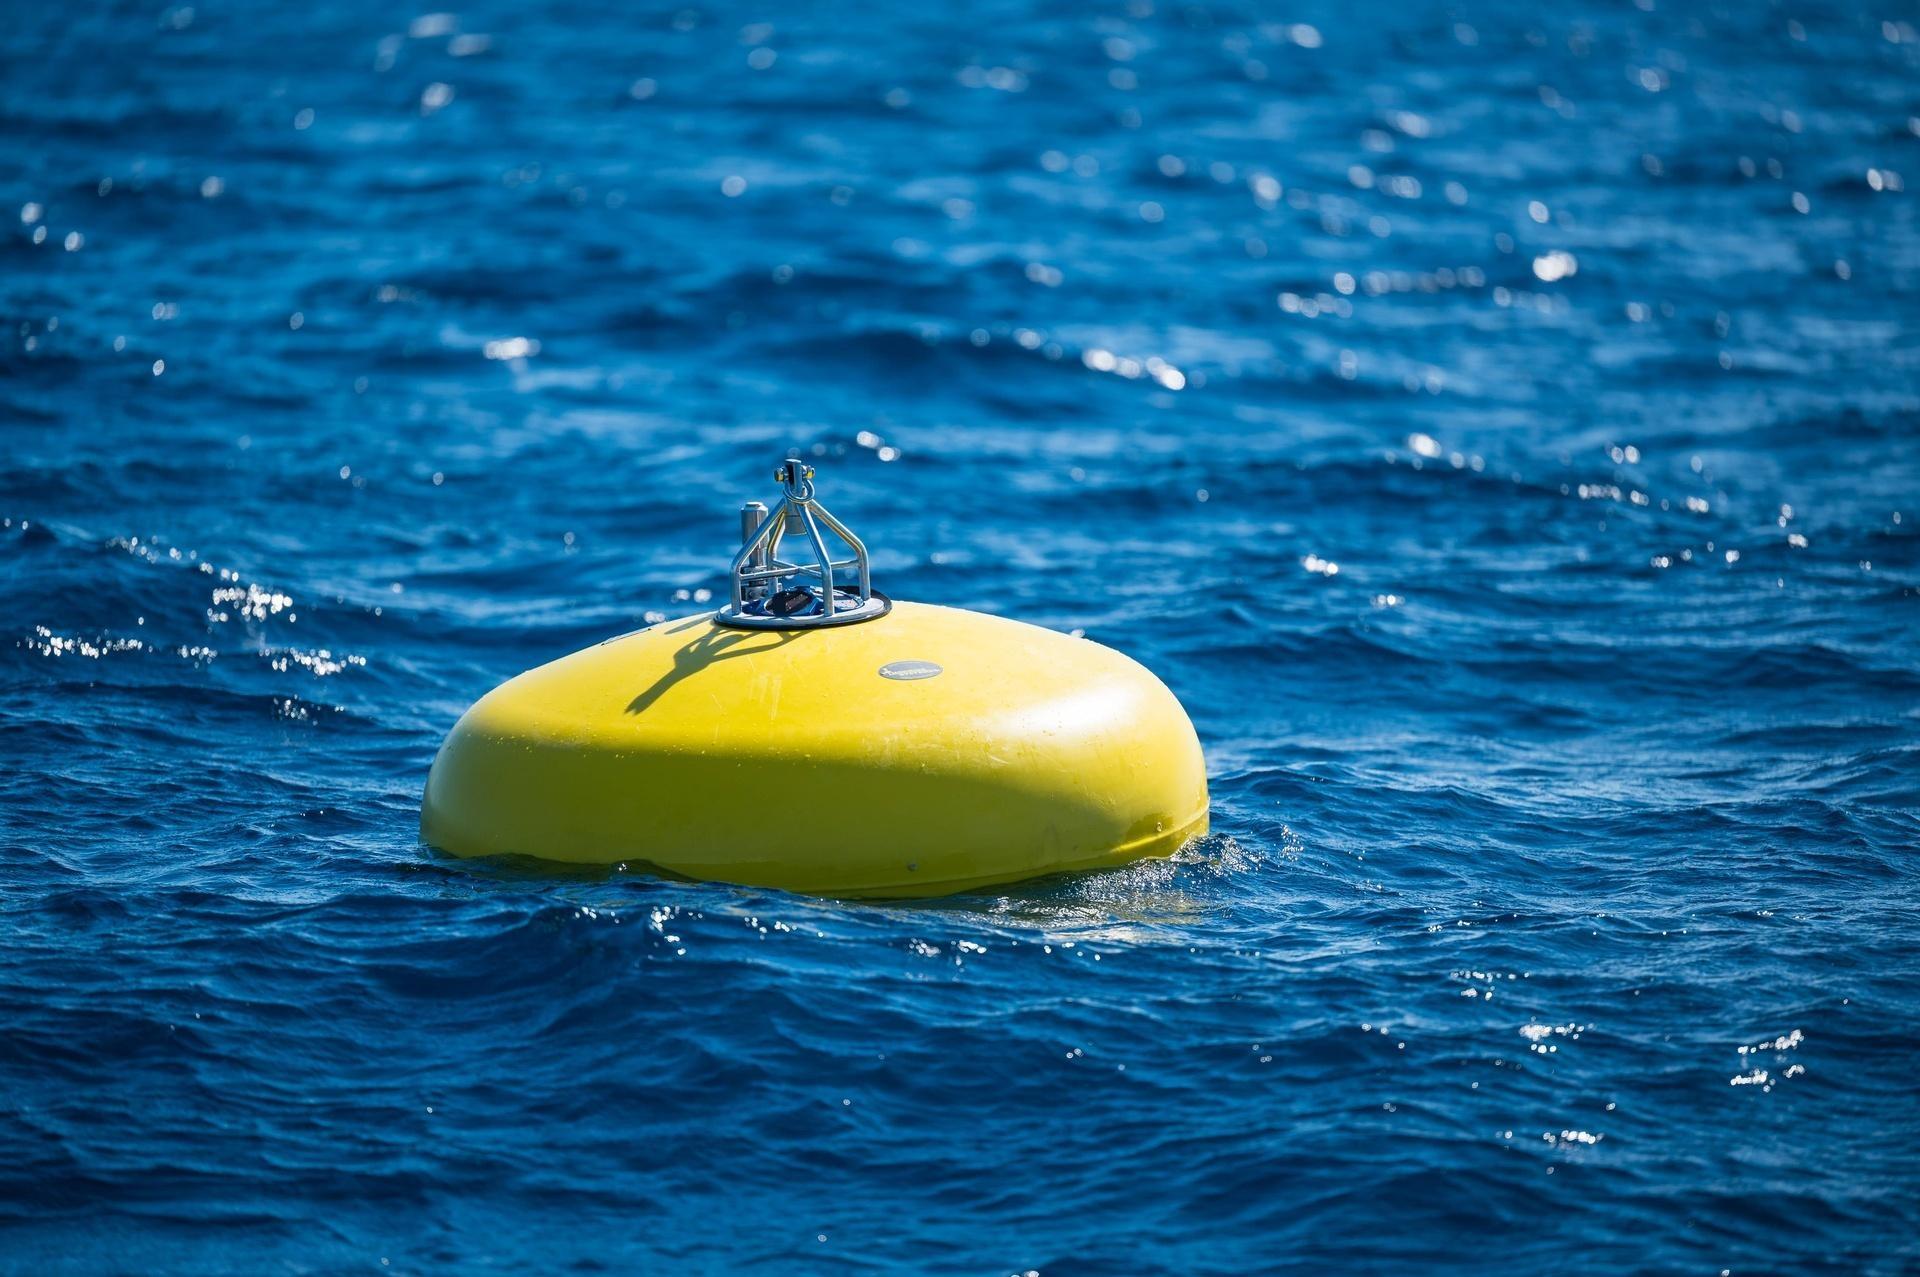 New buoy deployed on the ocean's surface. (yellow buoy on blue ocean)